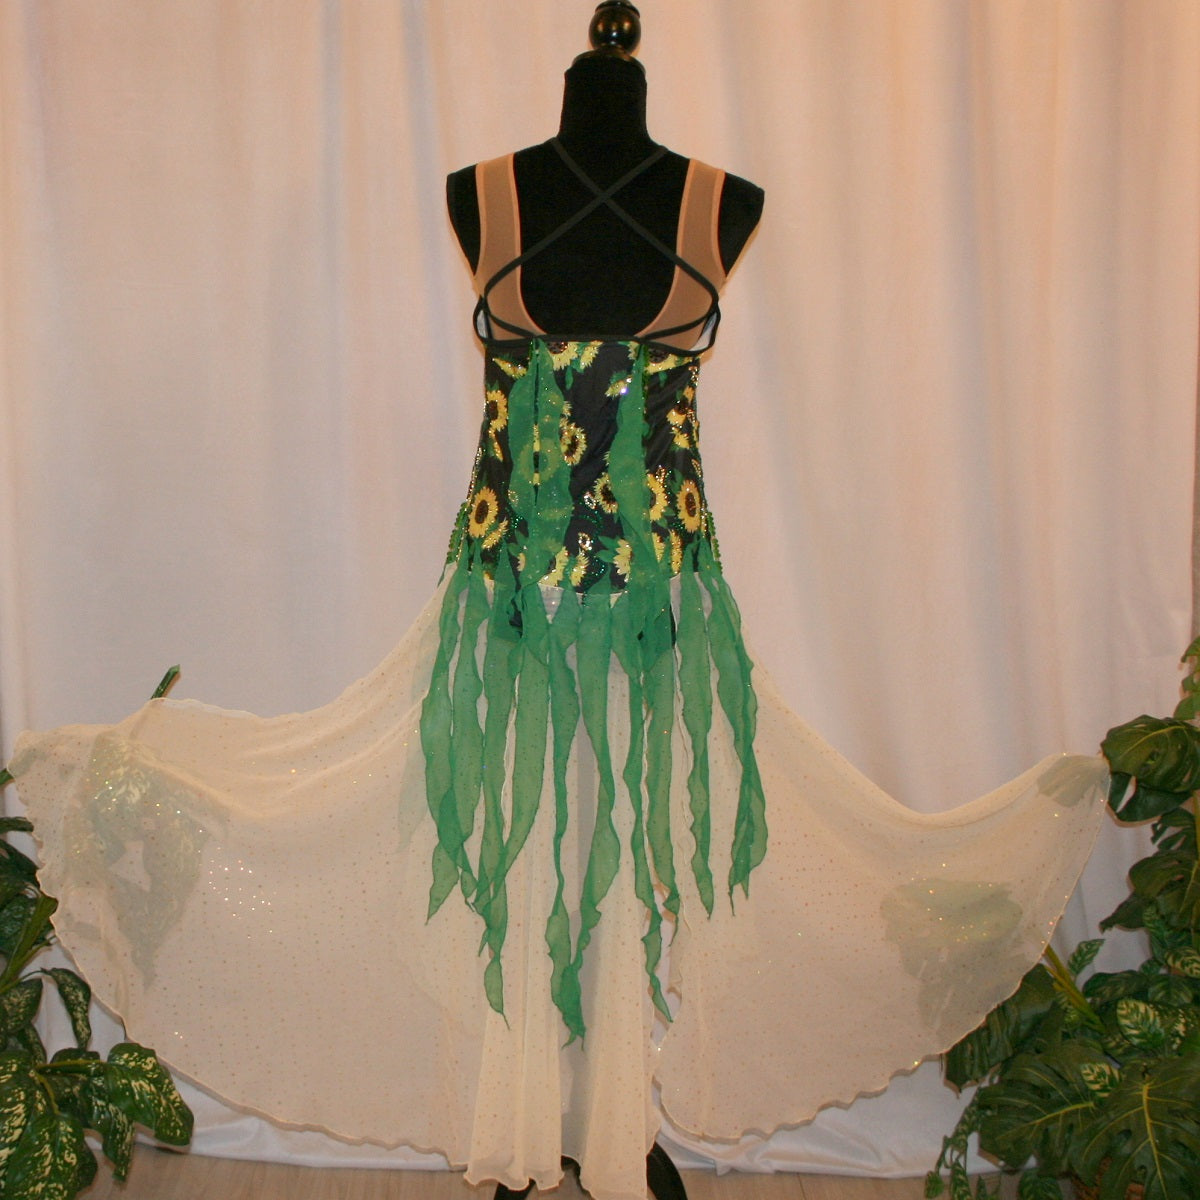 Back view of all around ballroom dress that  features yards of gorgeous soft yellow champagne sequin chiffon hand cut in large petal shapes for the skirting that is short in front & cascades longer in the back. Overlays of emerald flocked green chiffon skillfully hand crafted creating thin leaf shapes. Flows so beautifully for your foxtrots & waltzes! Lots of sparkle comes from the detailed rhinestone work 